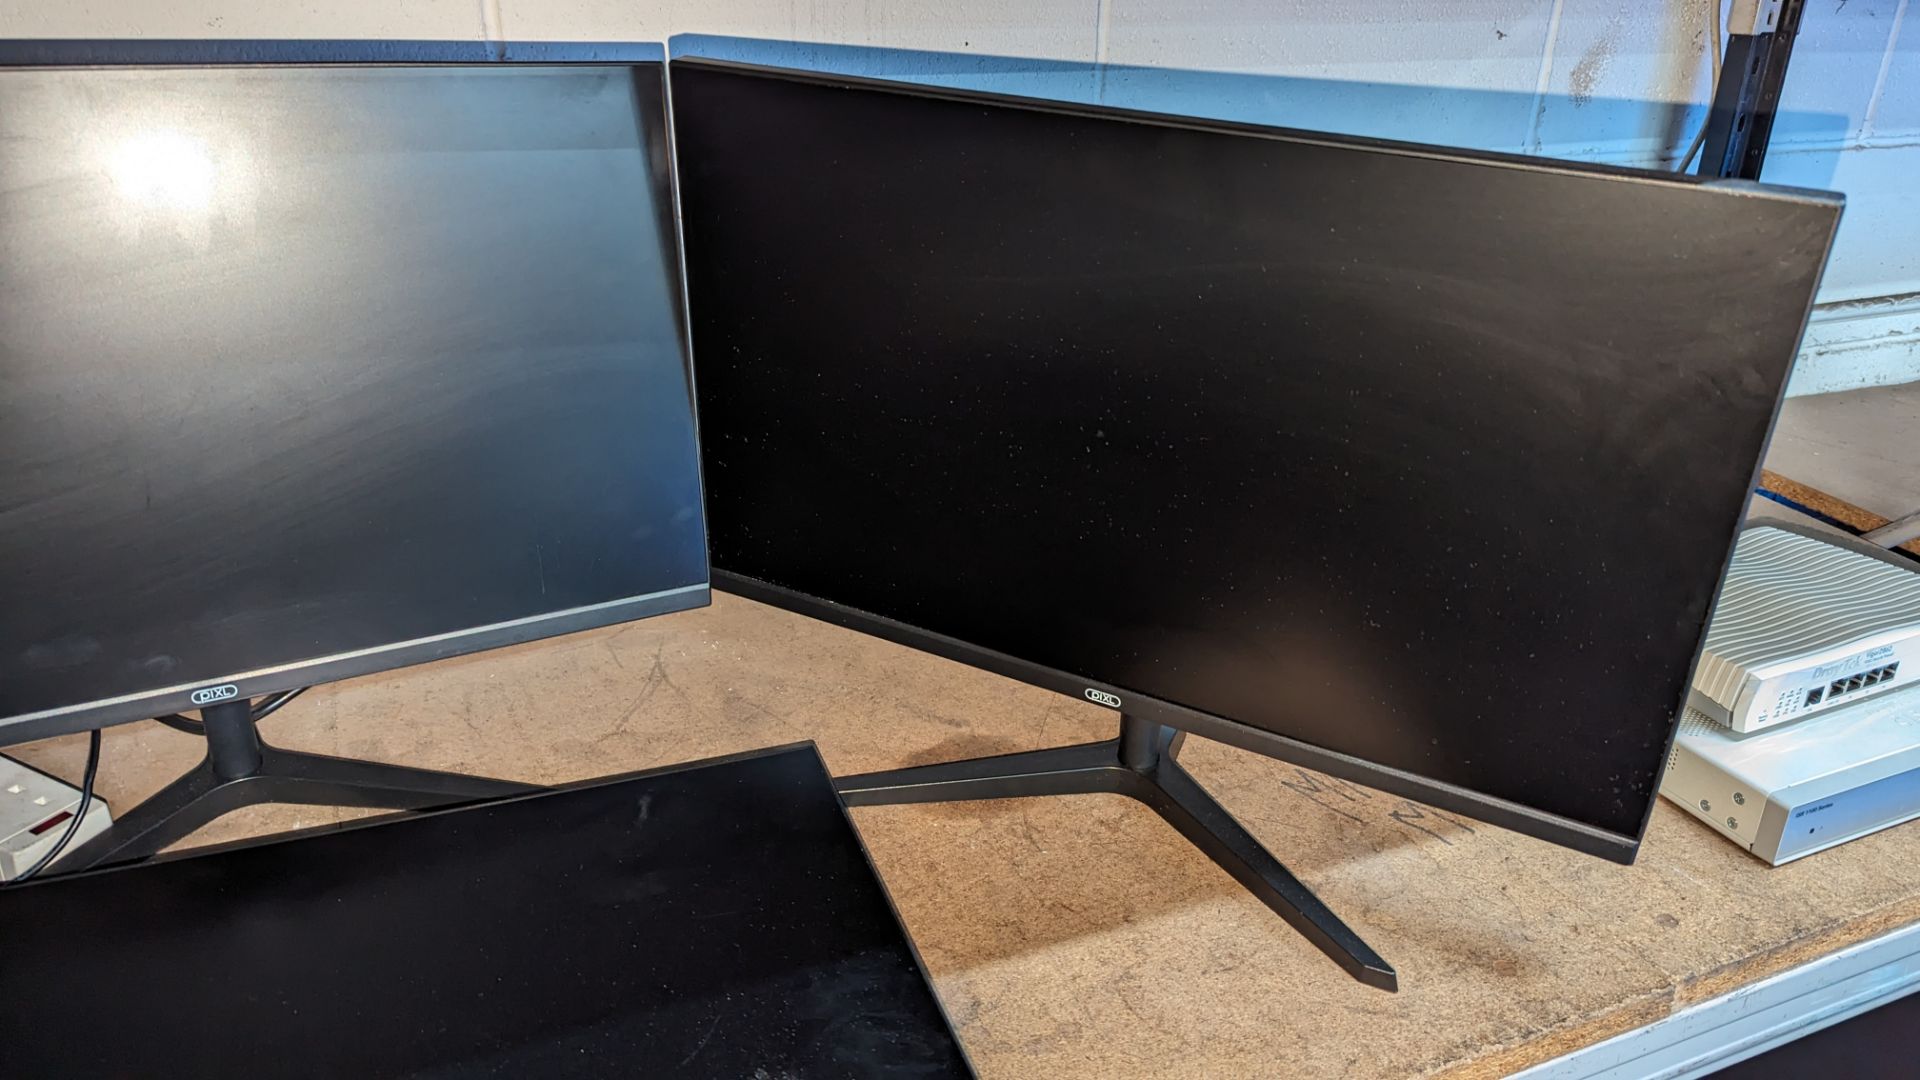 4 off Pixl 23" widescreen monitors. NB: each of these monitors require an external power supply an - Image 5 of 6